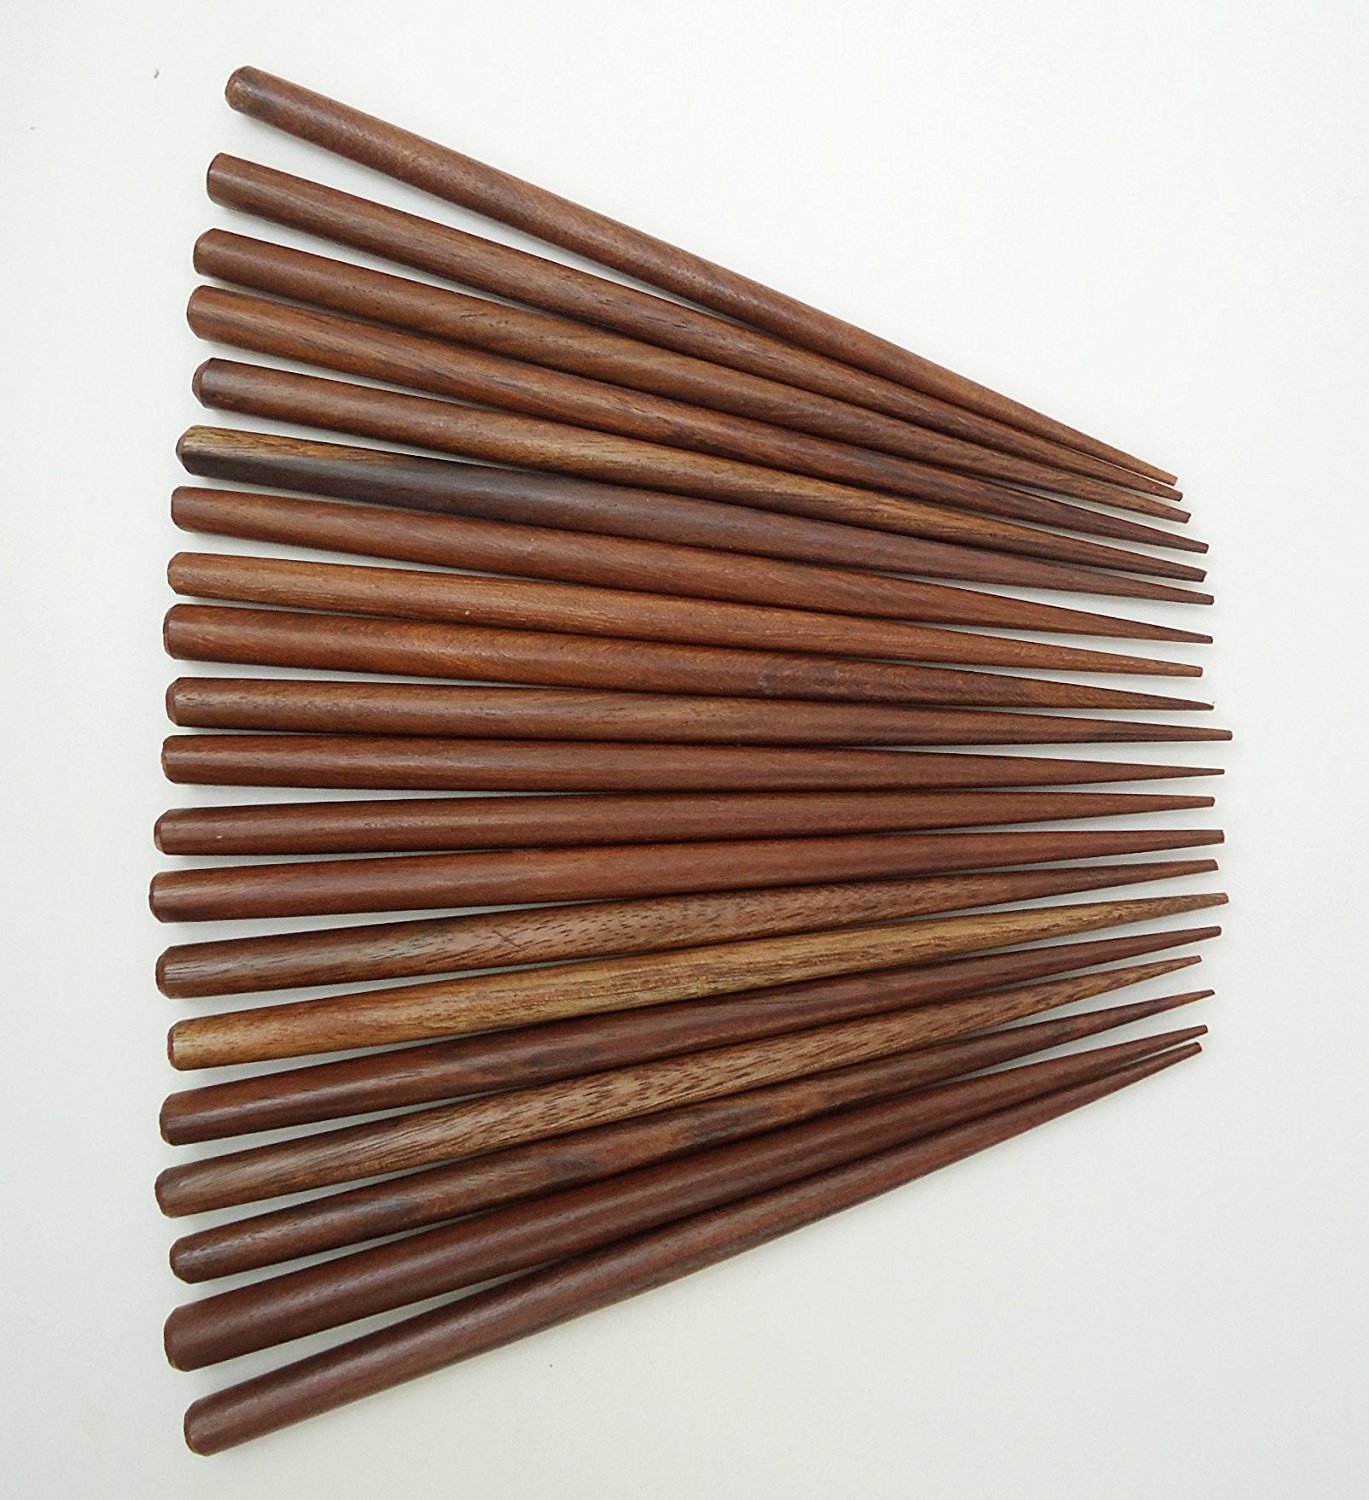 Amazon.com: Set of 20 Wooden Hair Sticks, Six Inches Long, Stained ...